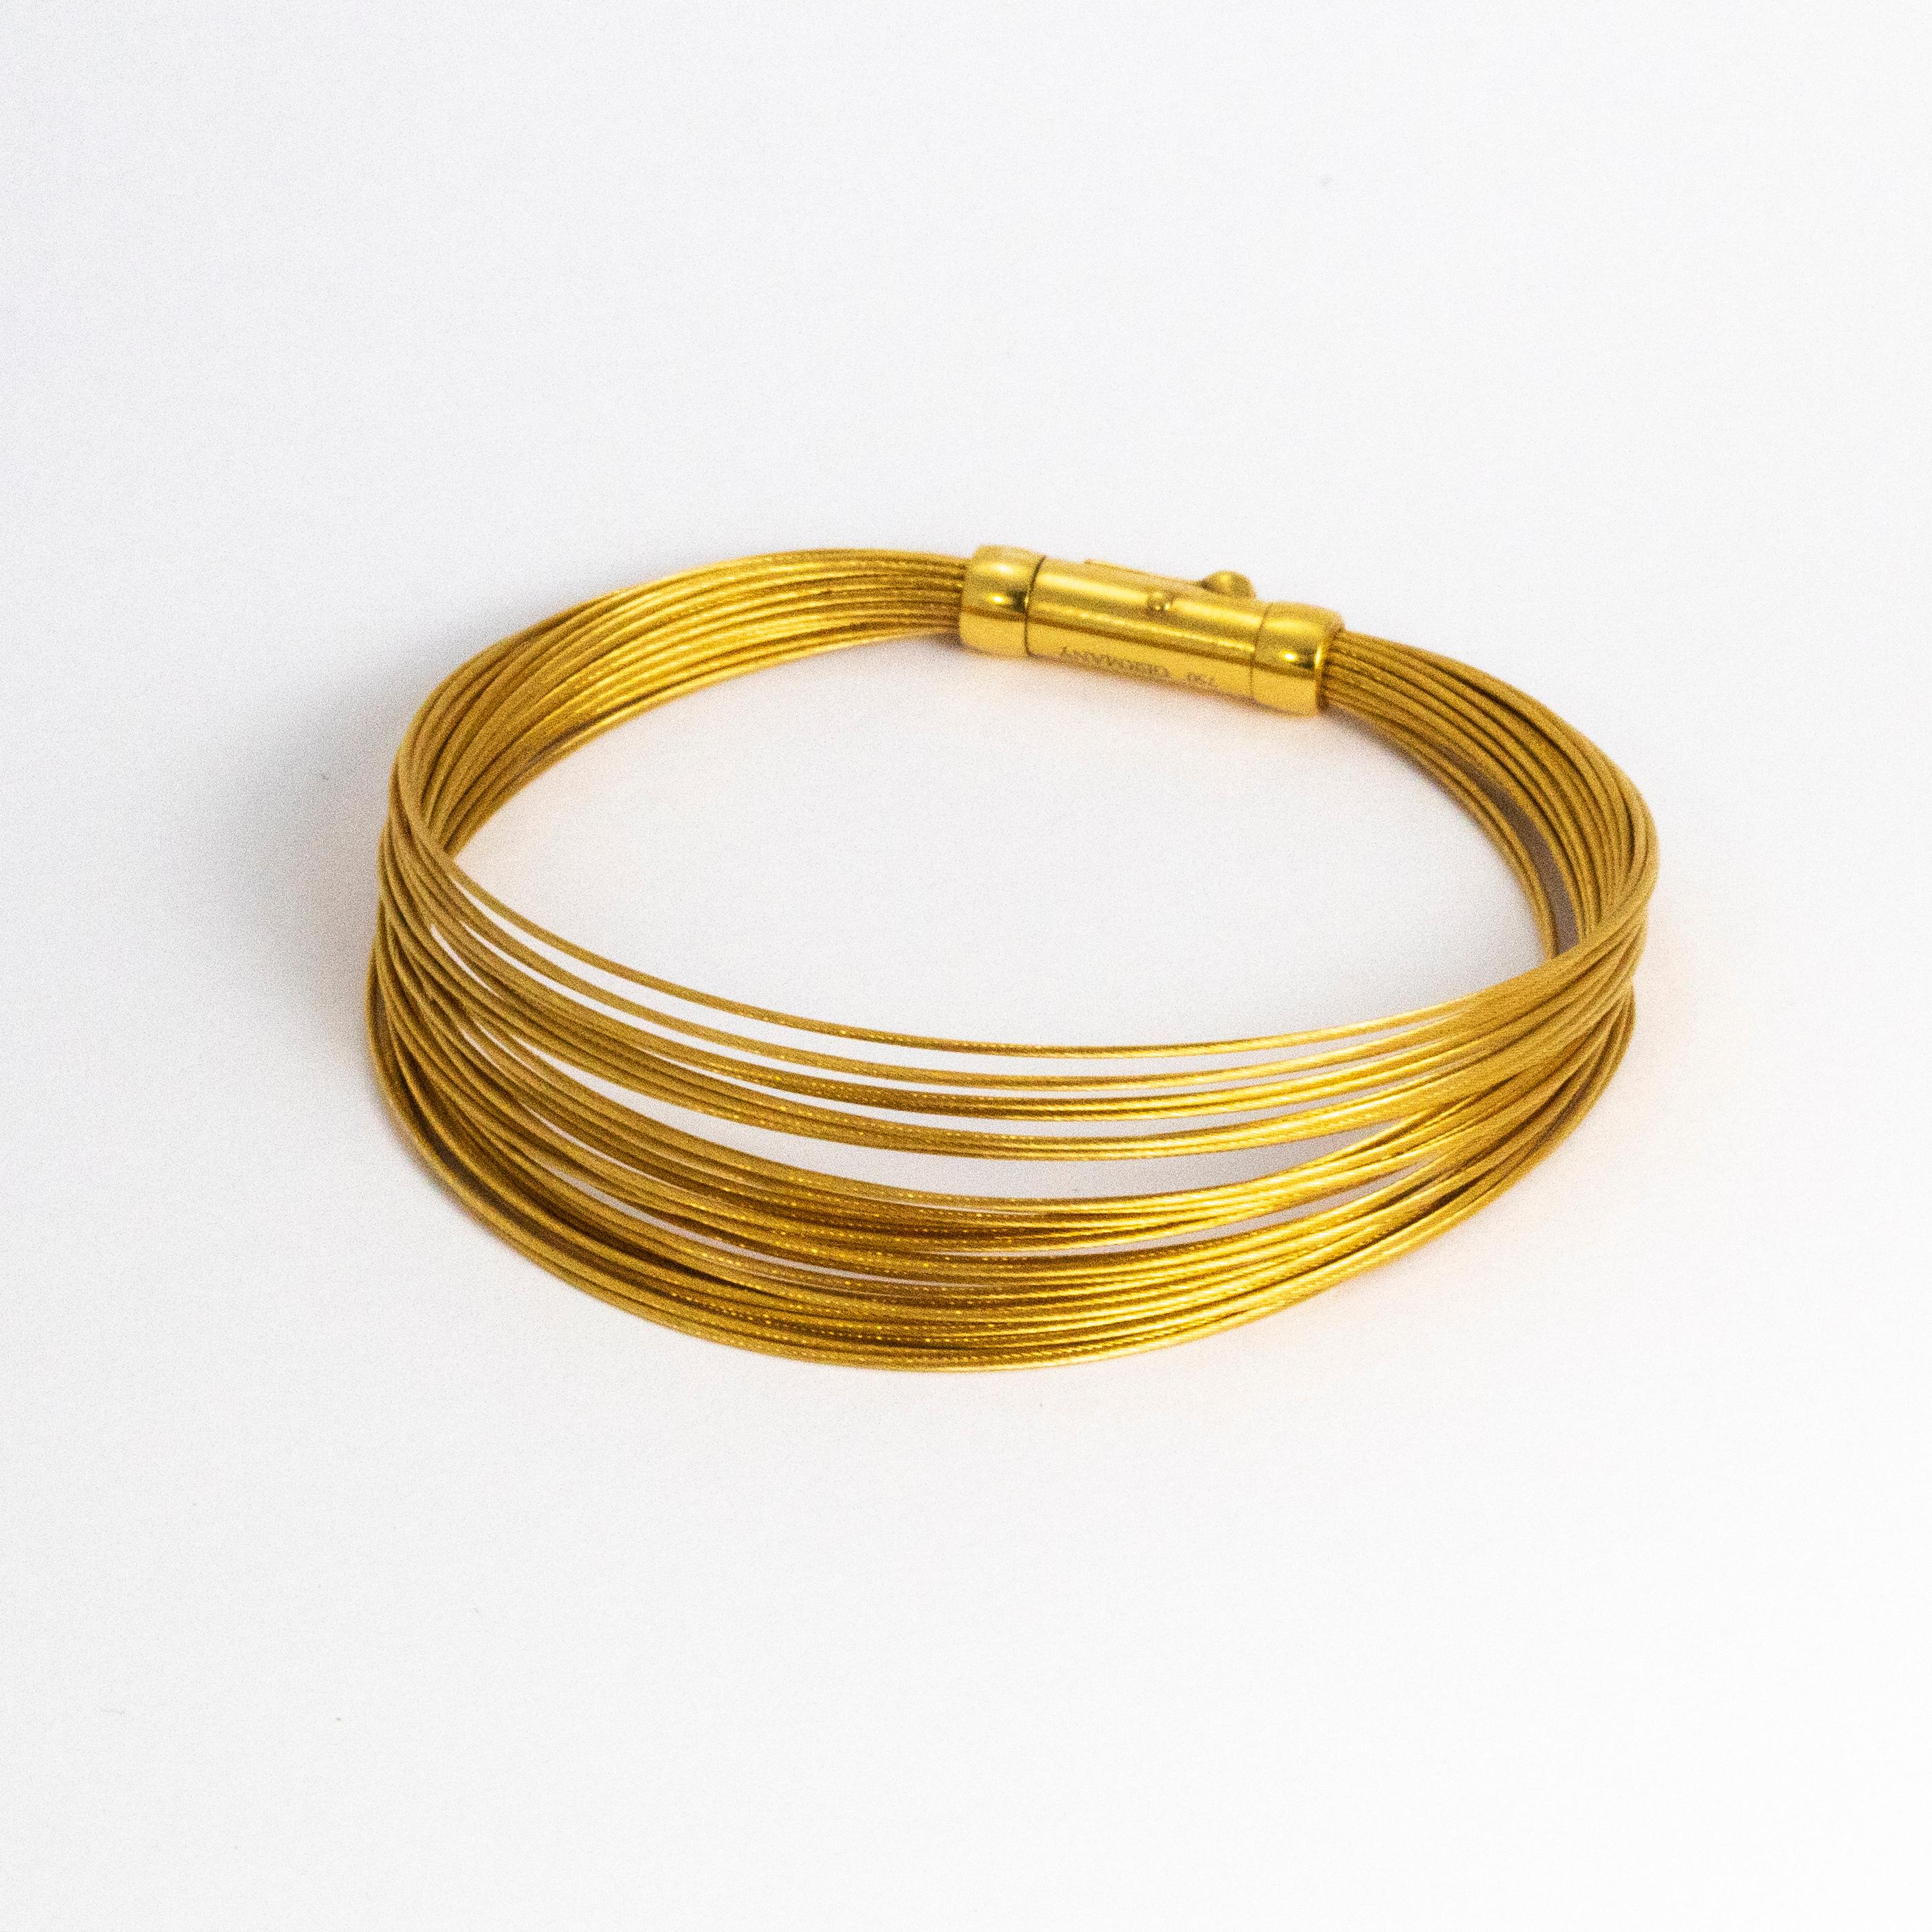 Modern and stylish design, this bracelet is made up of lots of fine 18ct gold wire strands which is all gathered together with a lovely classic Tiffany & Co fastening.

